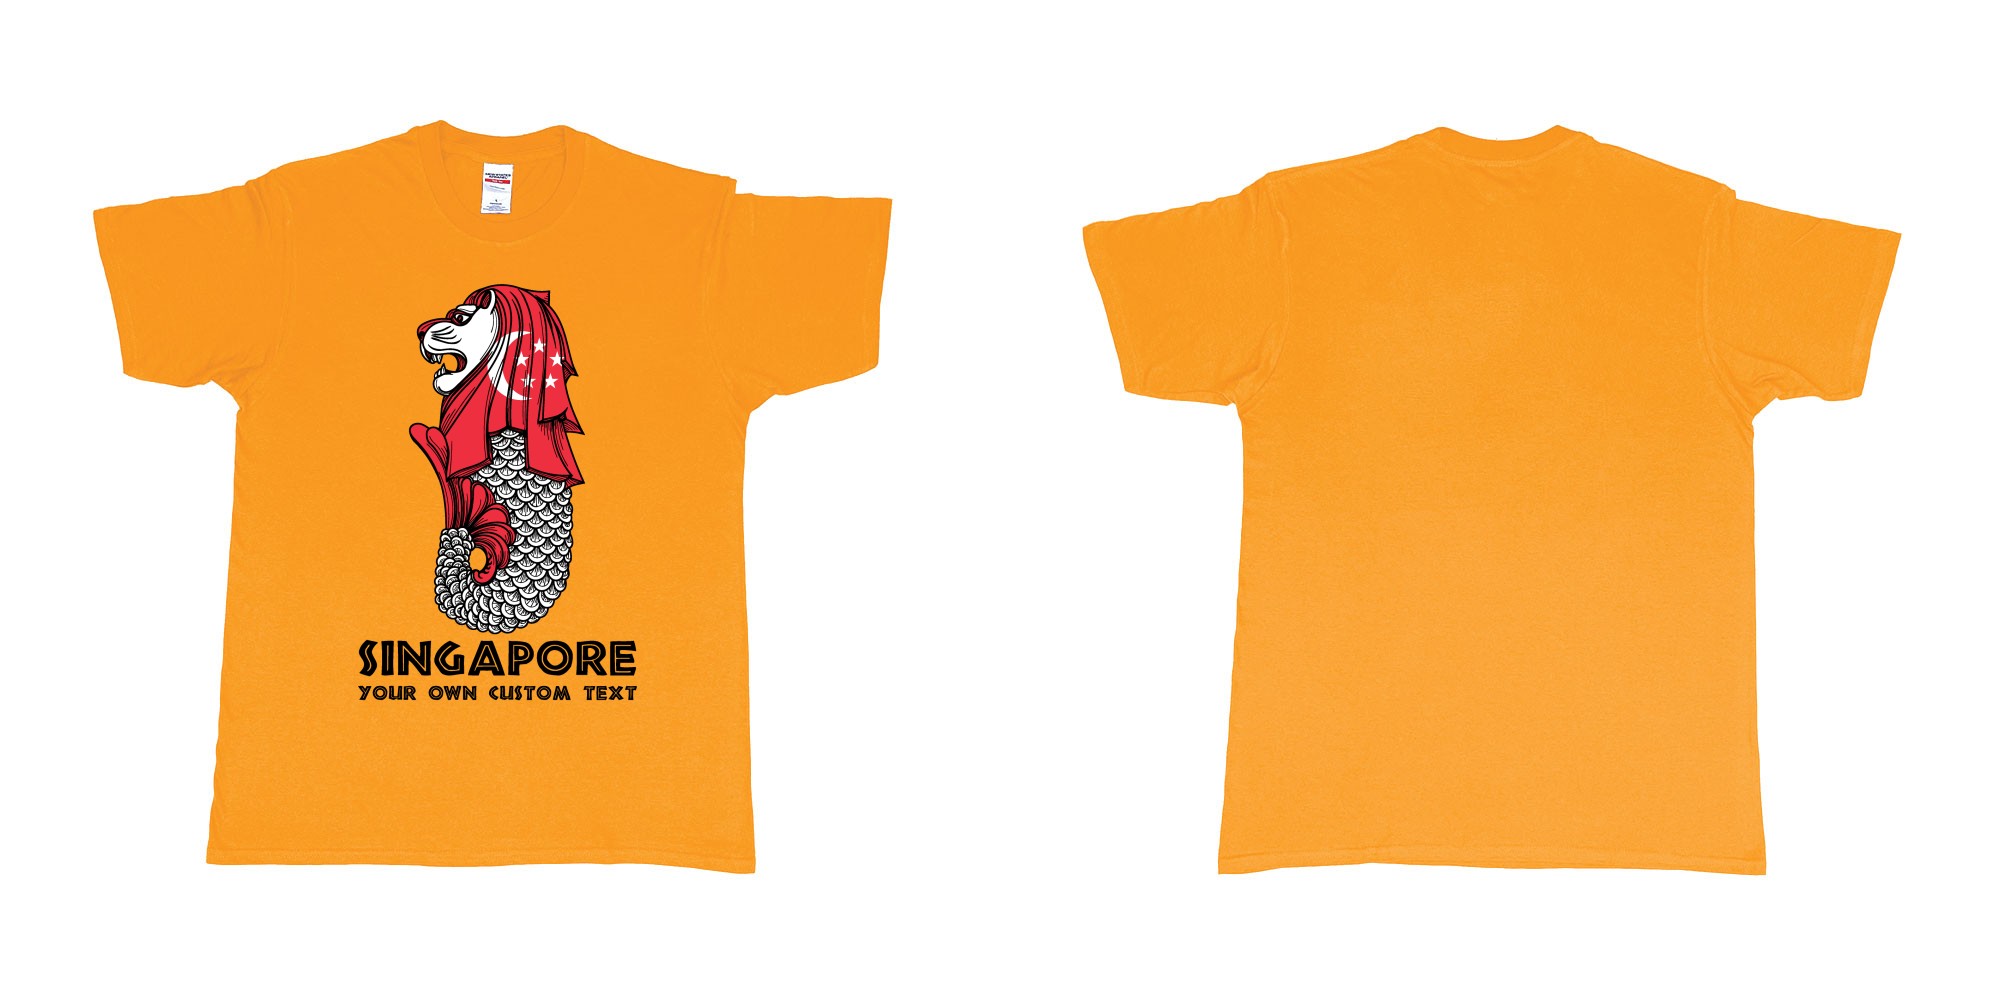 Custom tshirt design merlion singapore mascot statue lion in fabric color gold choice your own text made in Bali by The Pirate Way